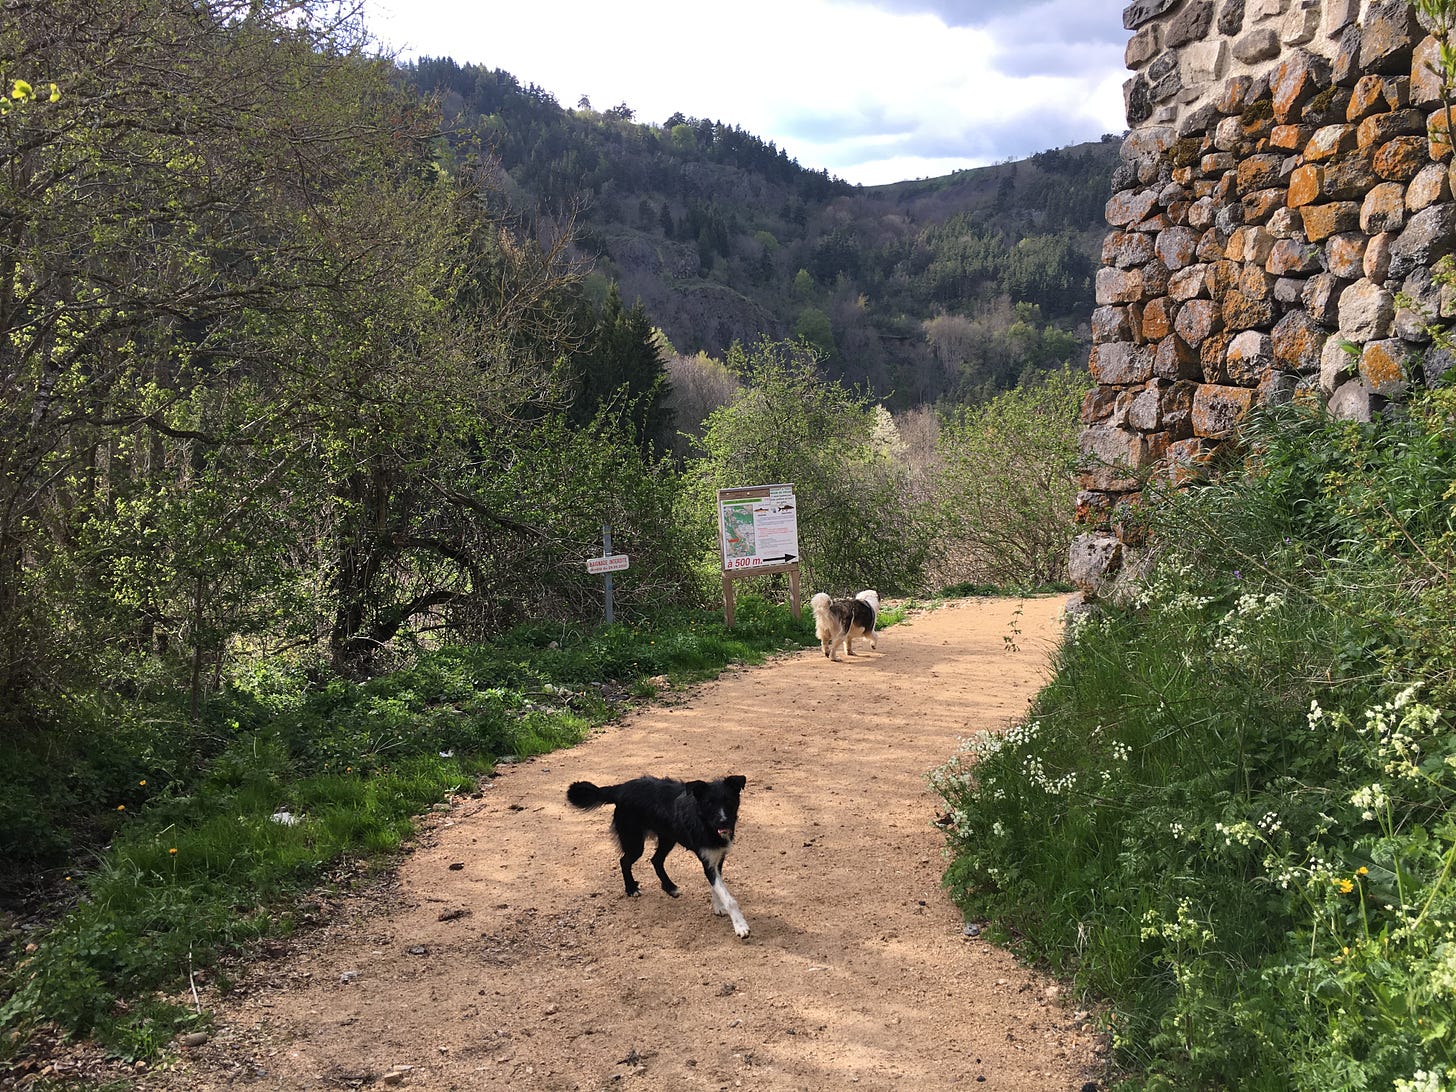 Two dogs walk ahead on a dirt trail following a stone wall